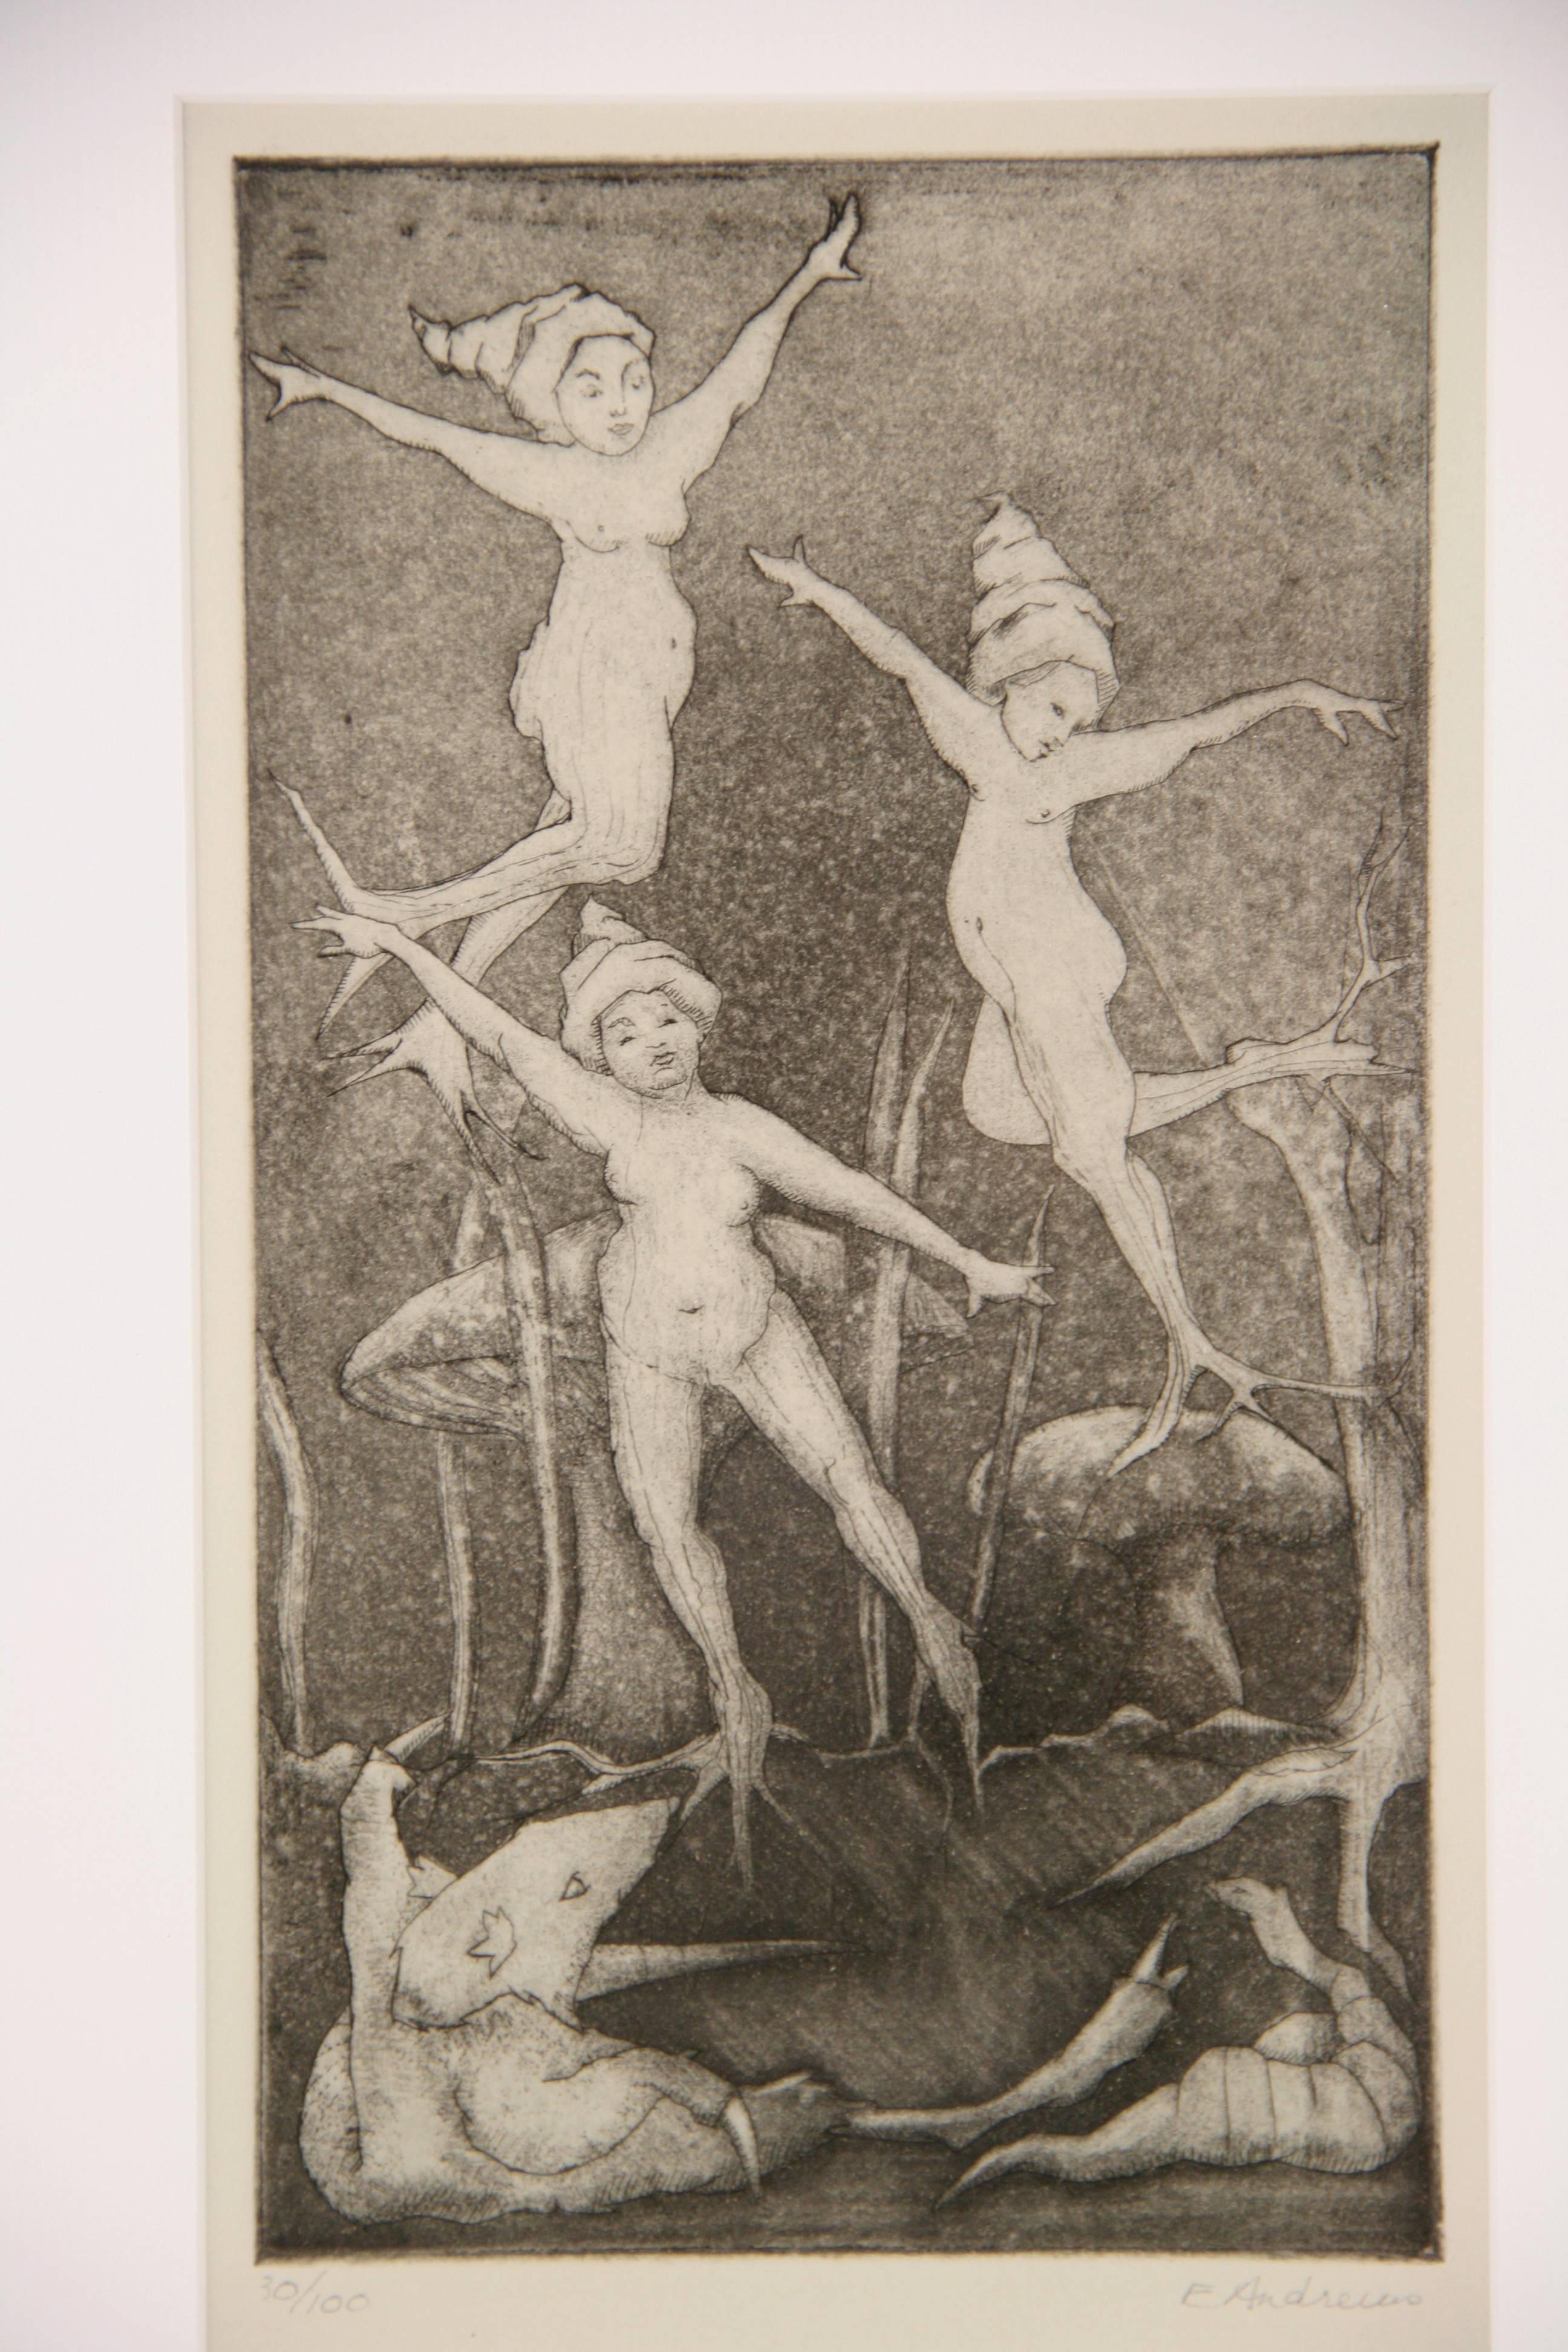 Unknown Figurative Print - English Dancing Mythical Fairies  Abstract  Figurative Engraving